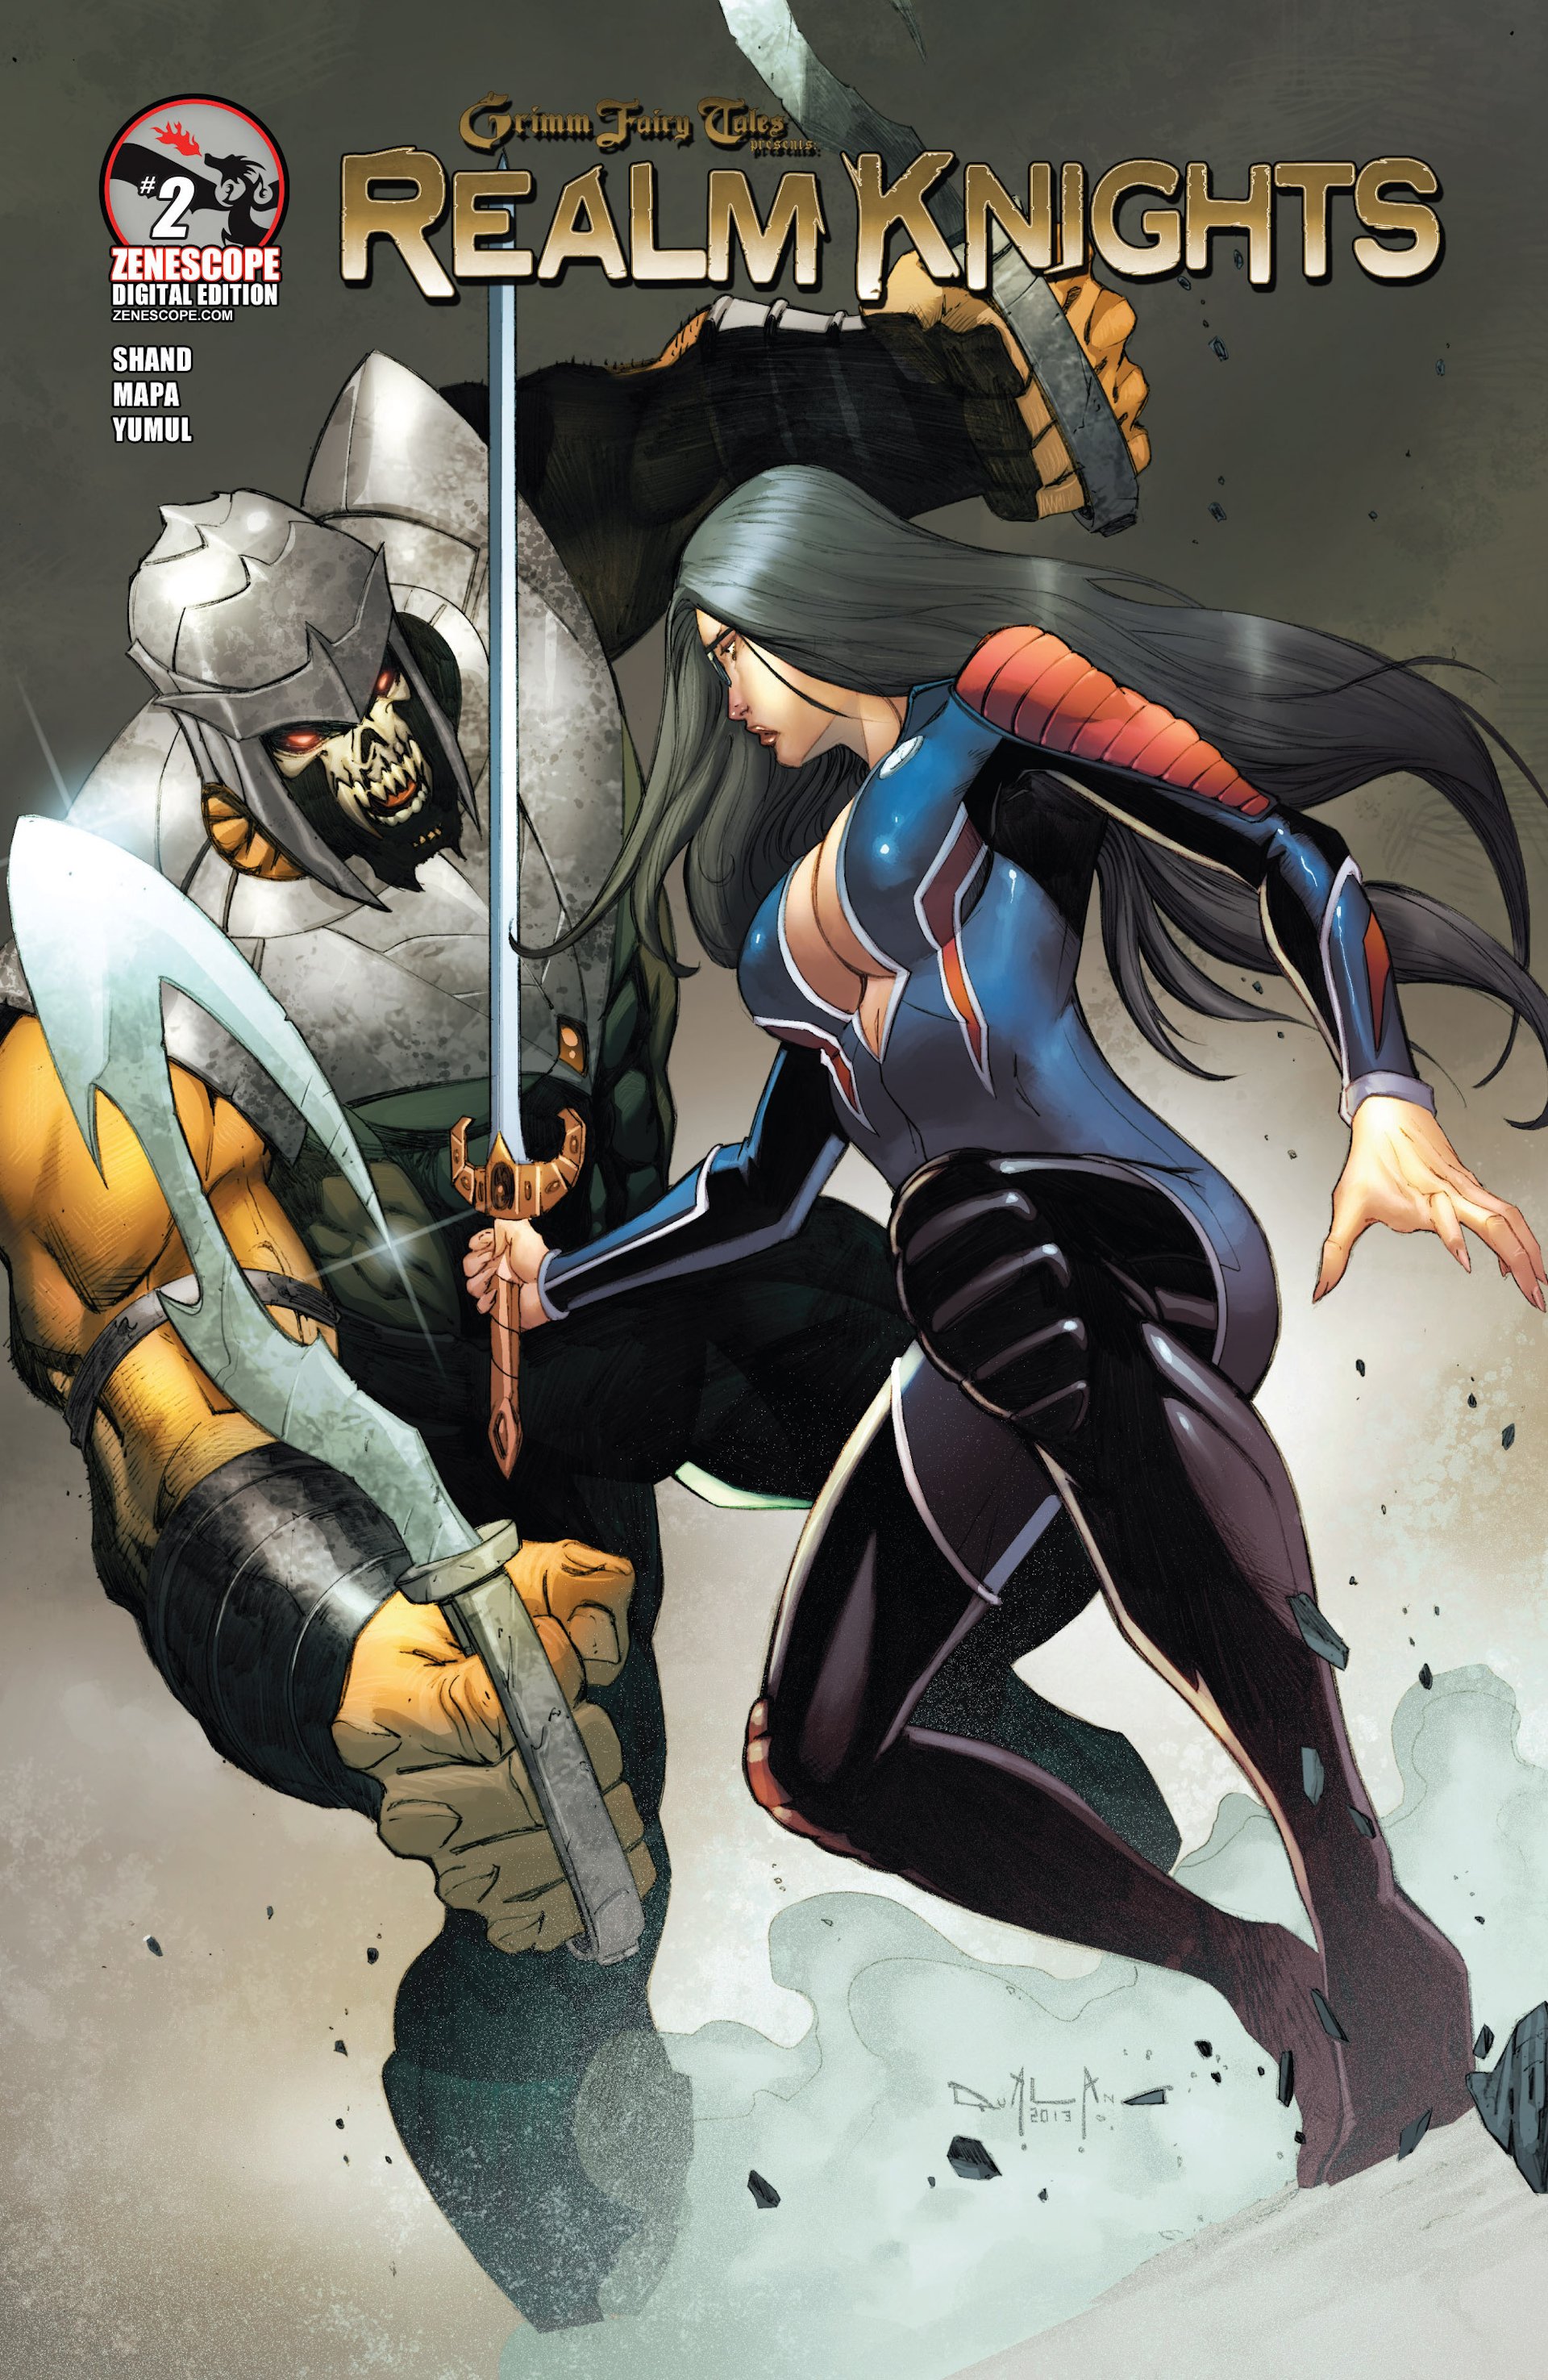 Grimm Fairy Tales: Realm Knights #5